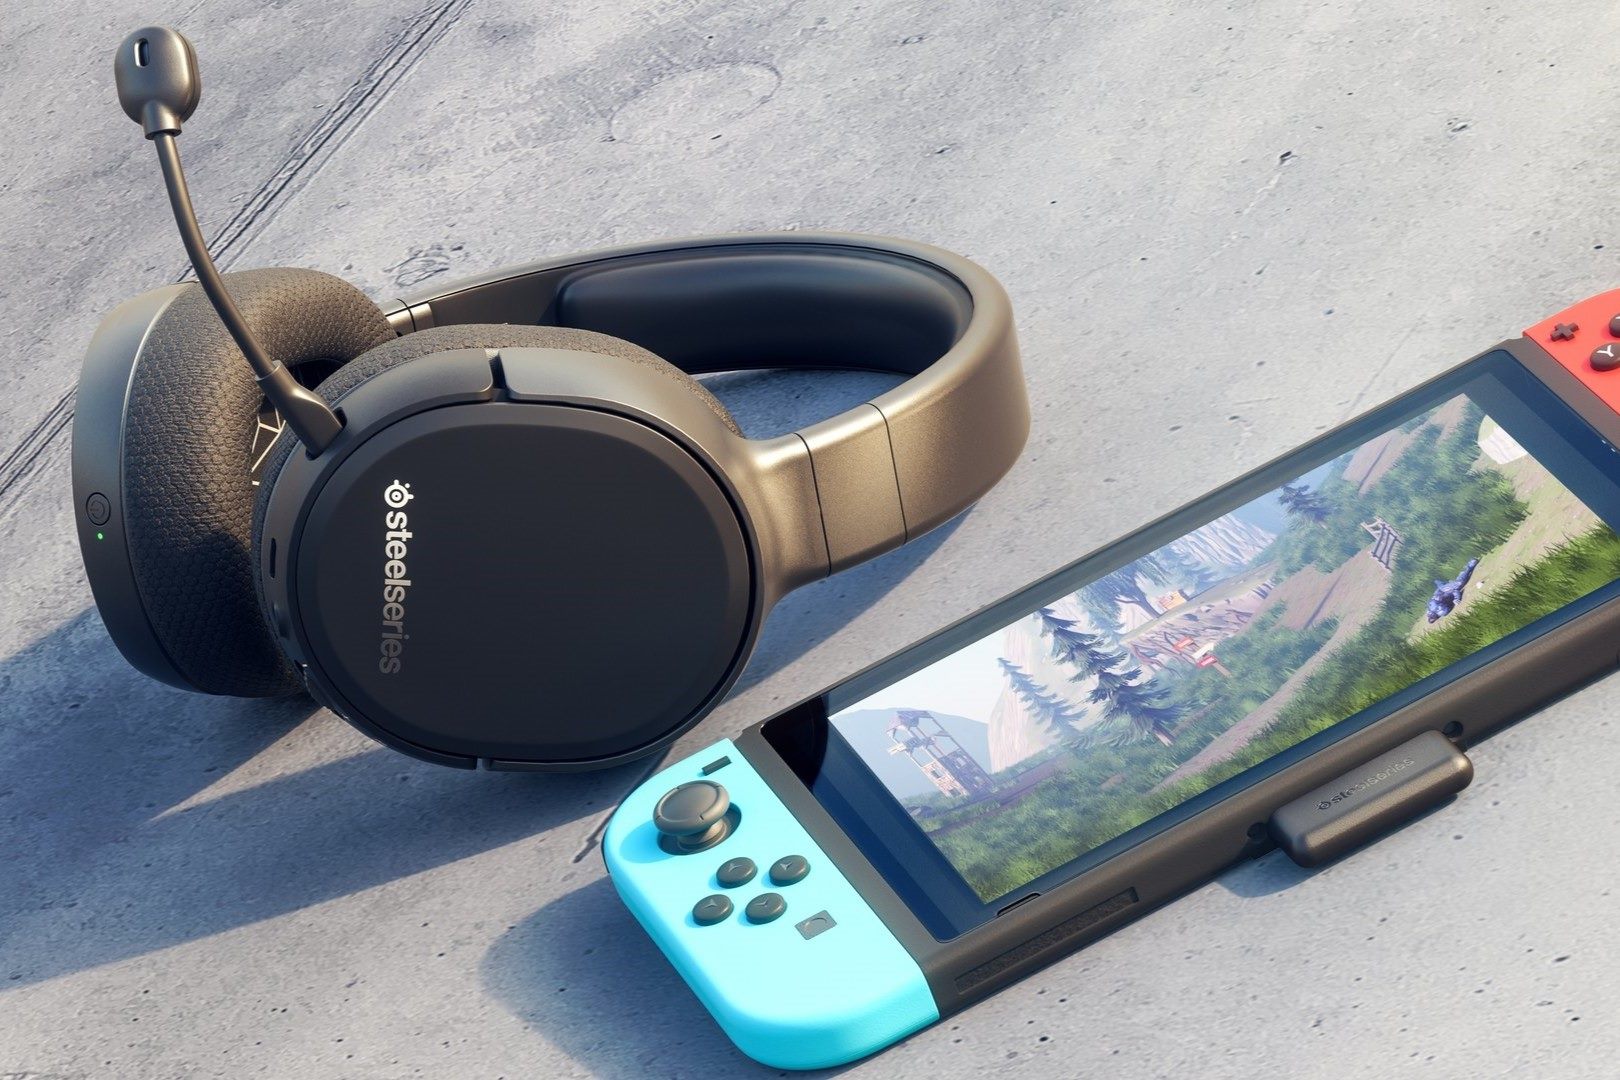 Ensuring Your Nintendo Switch Headset Functions Properly